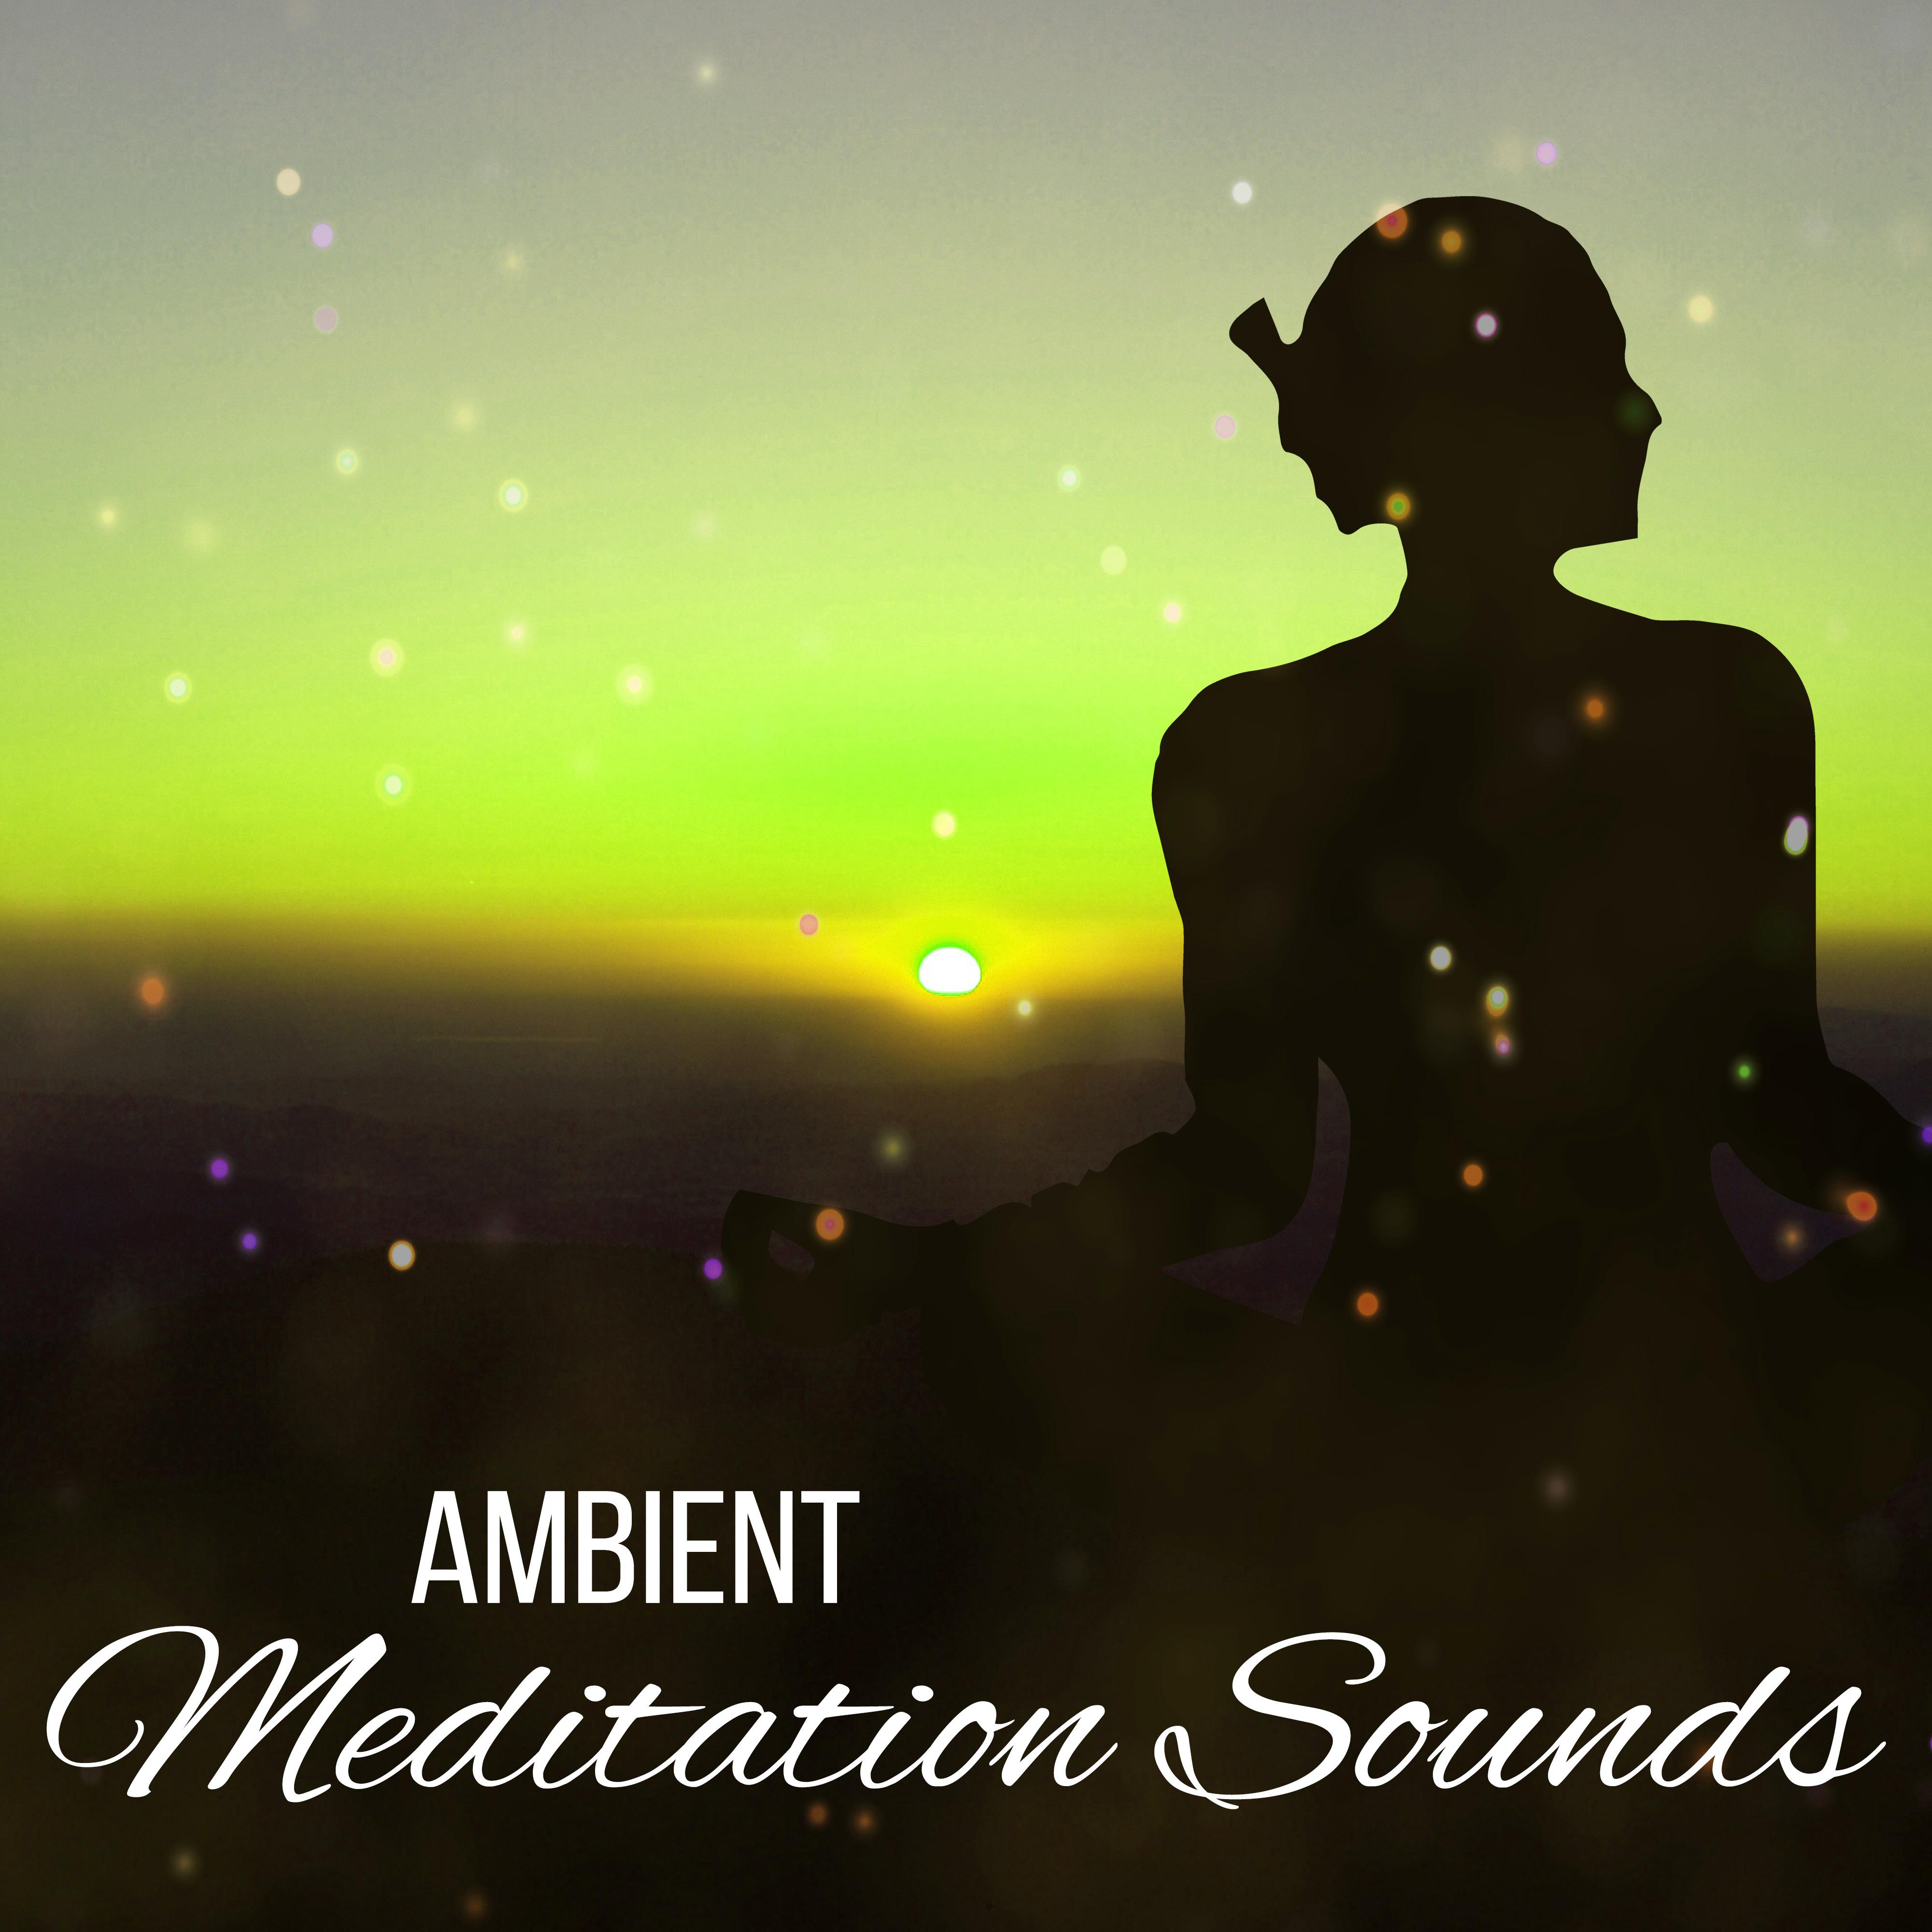 Ambient Meditation Sounds  Soft New Age Music to Meditate, Spiritual Calmness, Free Your Mind